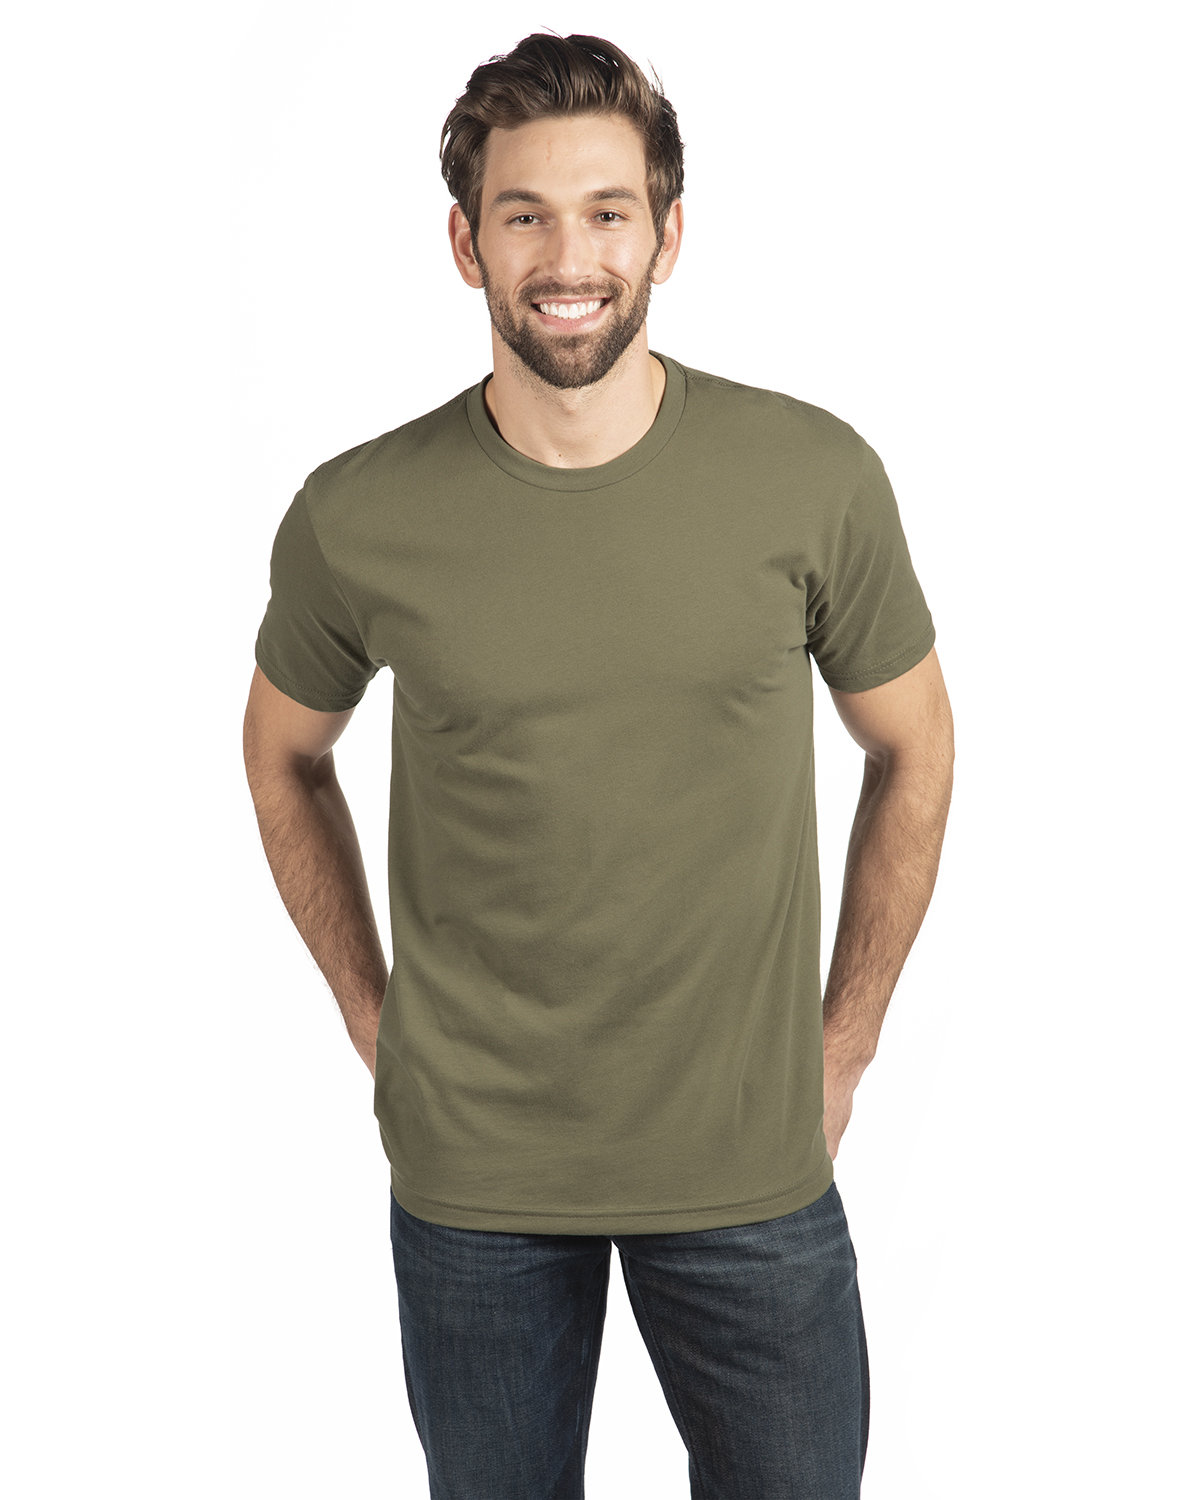 Next Level Apparel Men's Sueded Crew MILITARY GREEN 